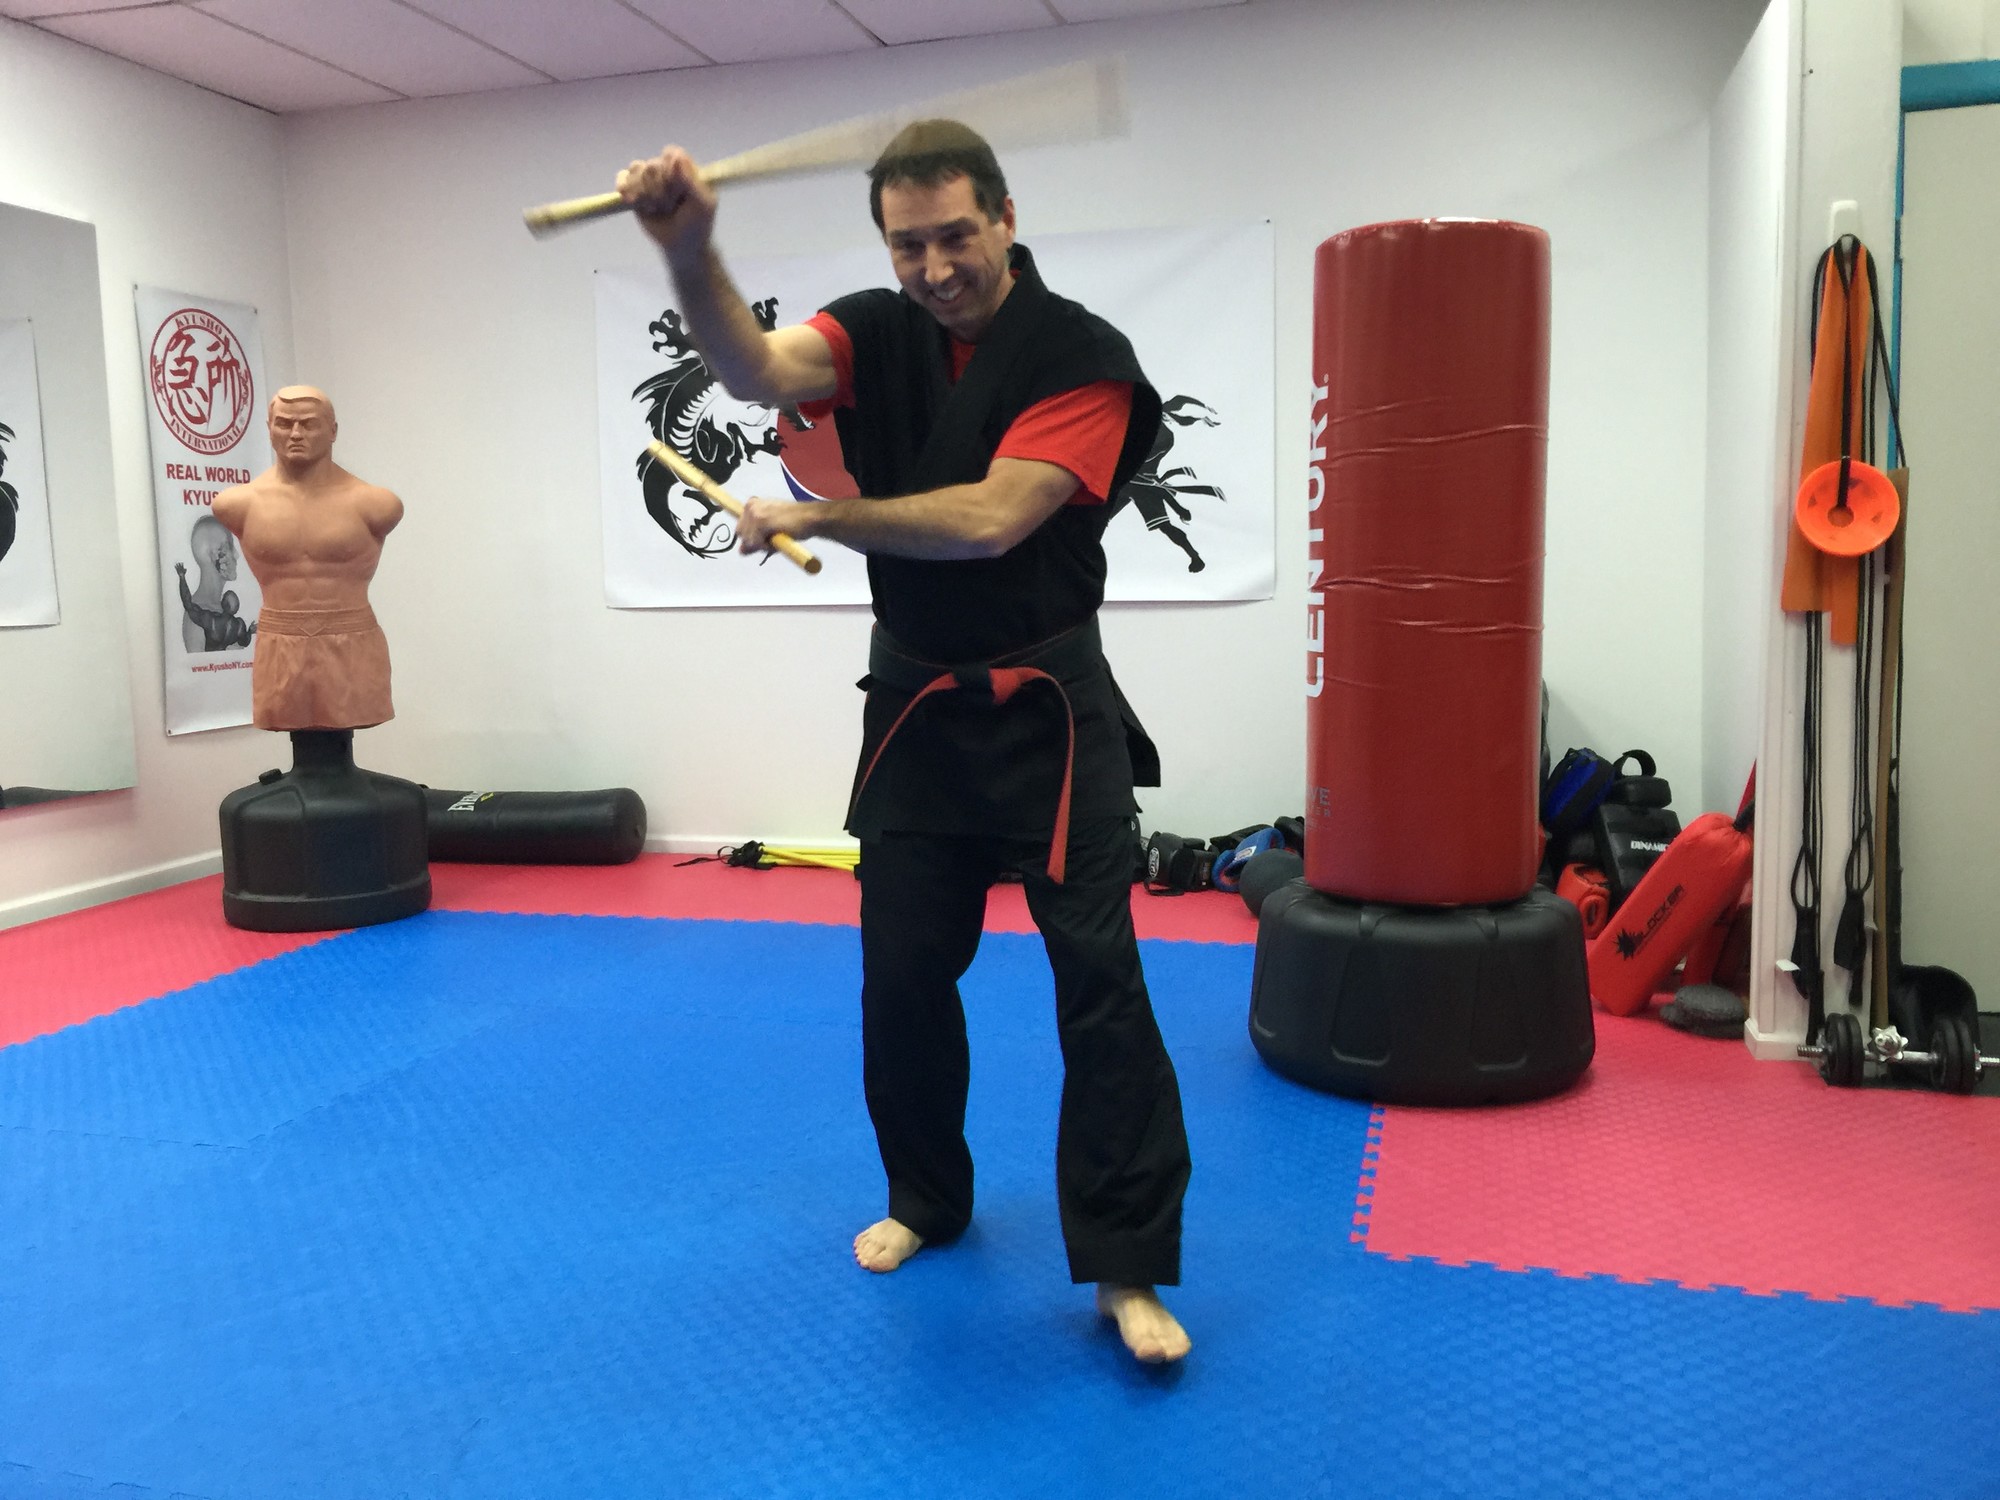 Self-defense is one of the main disciplines that Gallo teaches his students at his martial arts dojo in Elmont.